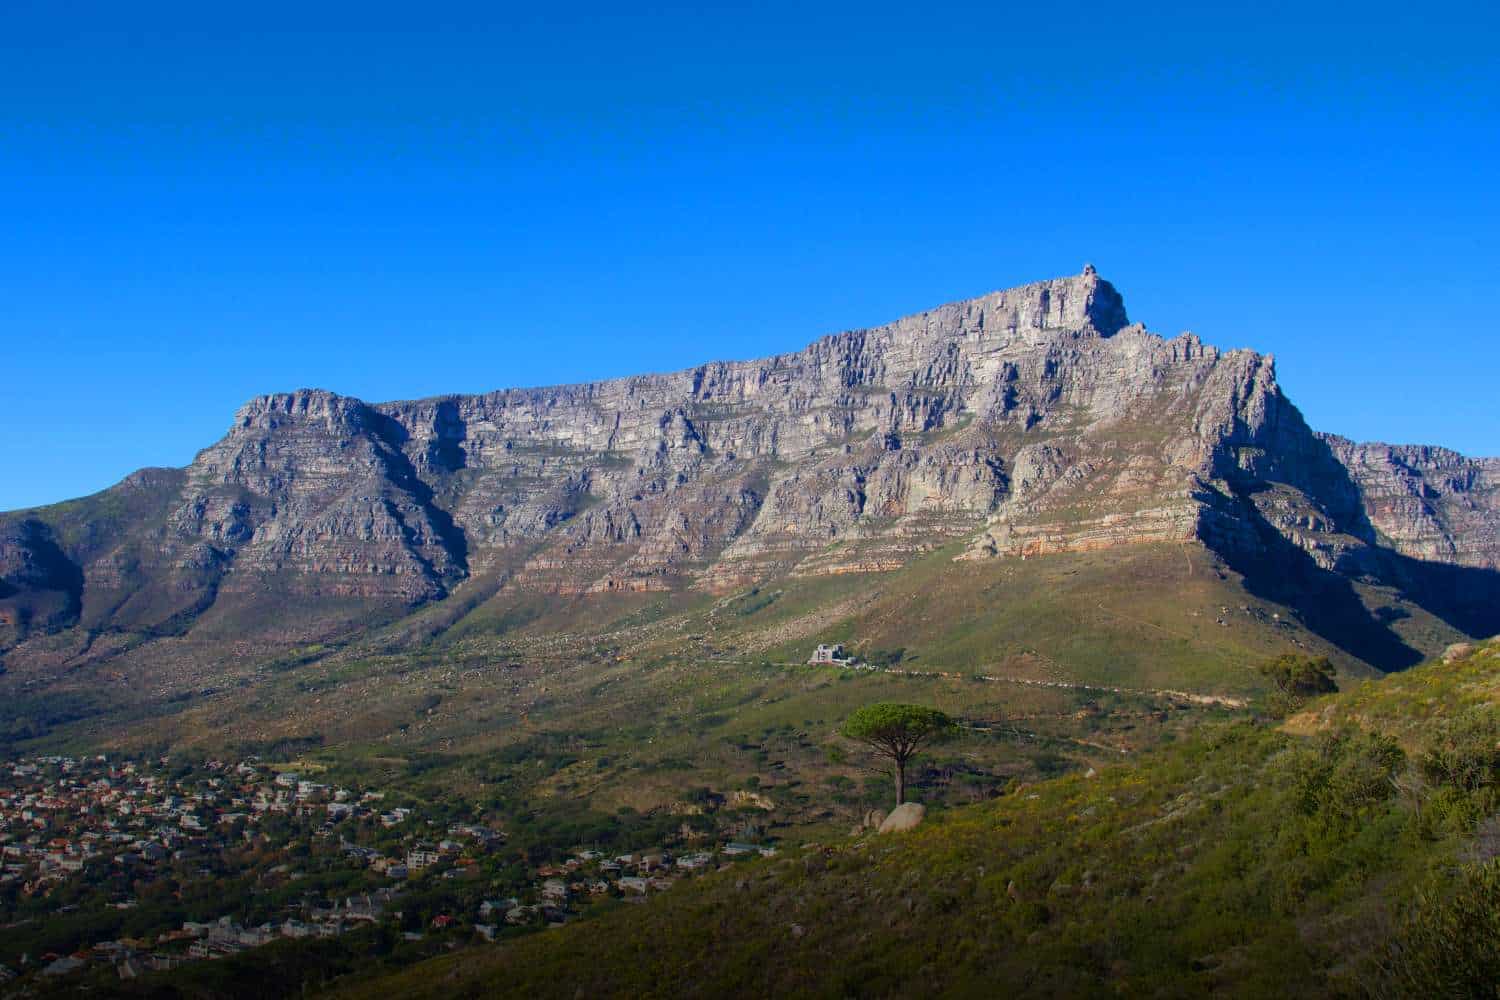 Table Mountain national park cape town